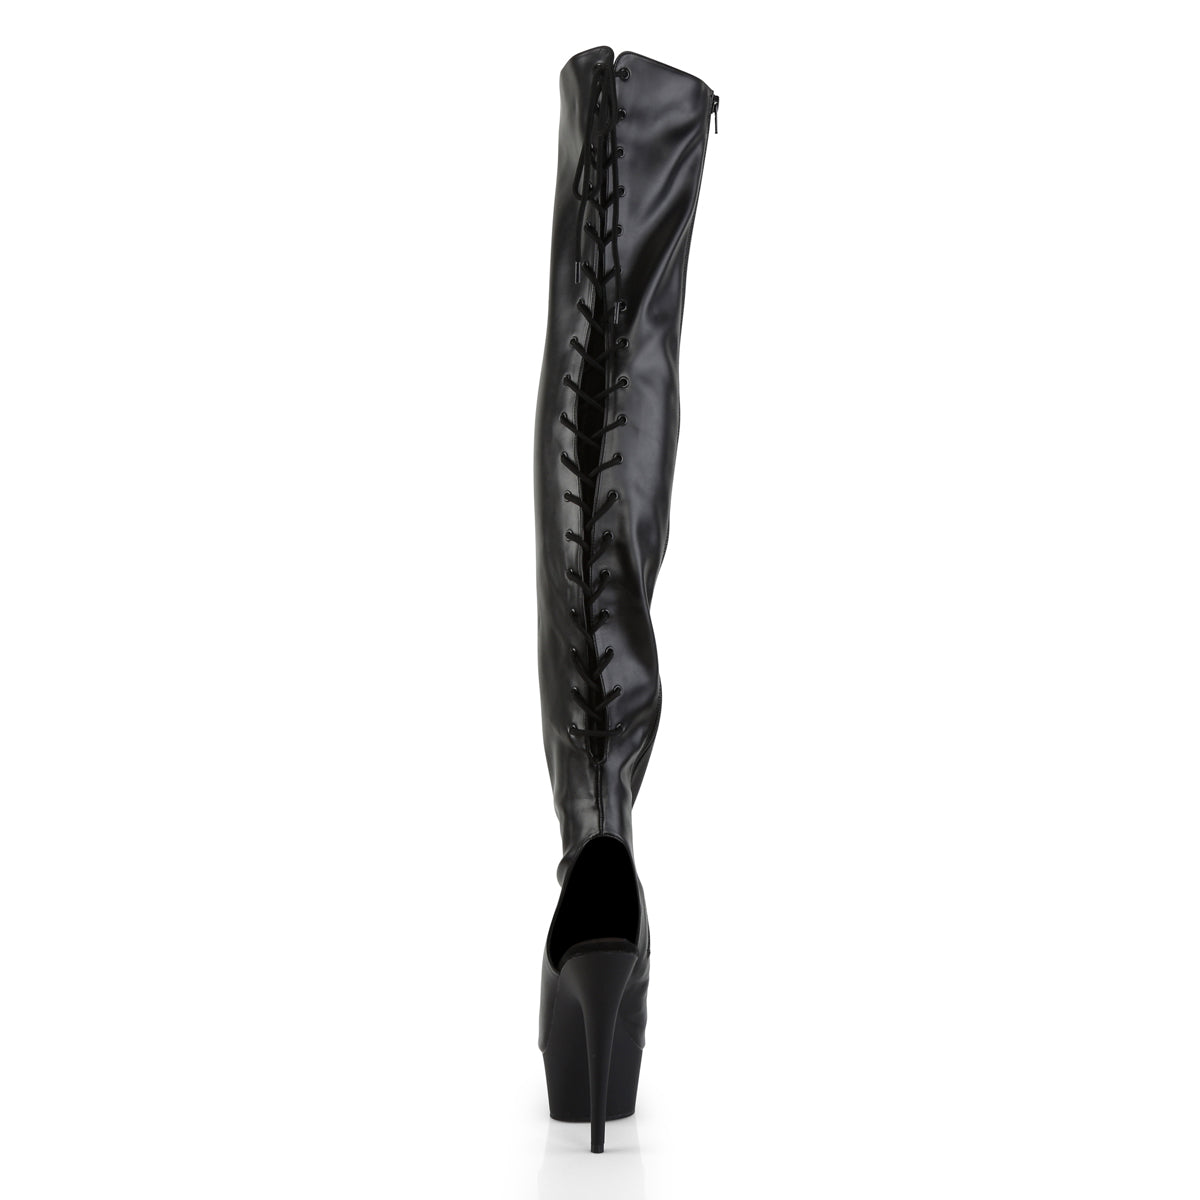 DELIGHT-3017 Pleaser Black Stretch Faux Leather/Black Platform Shoes [Thigh High Boots]